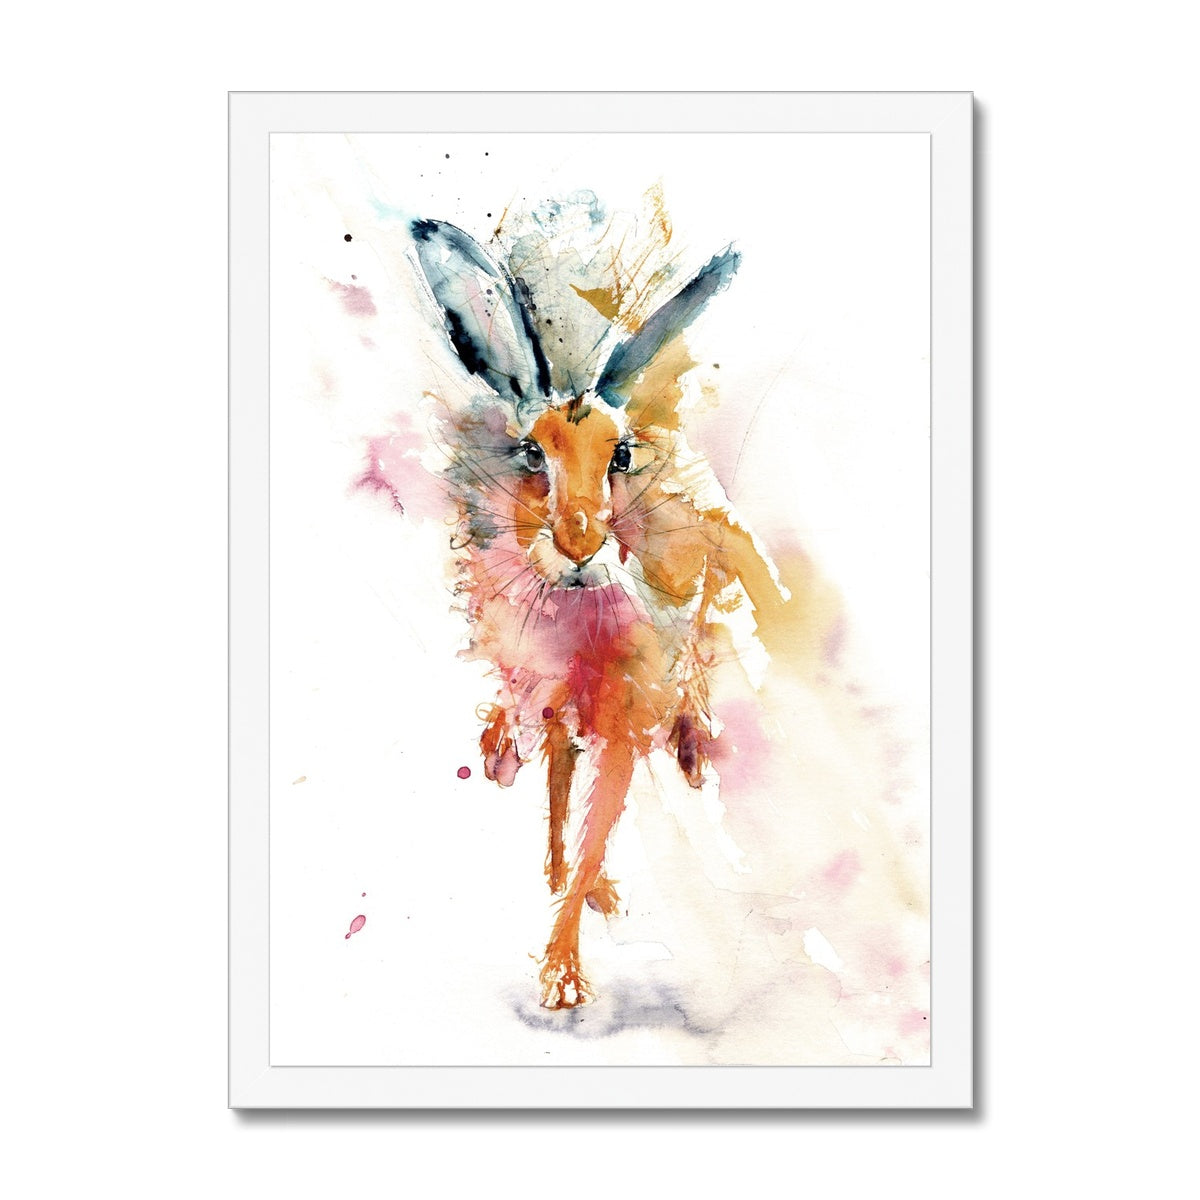 Running to you Framed Print